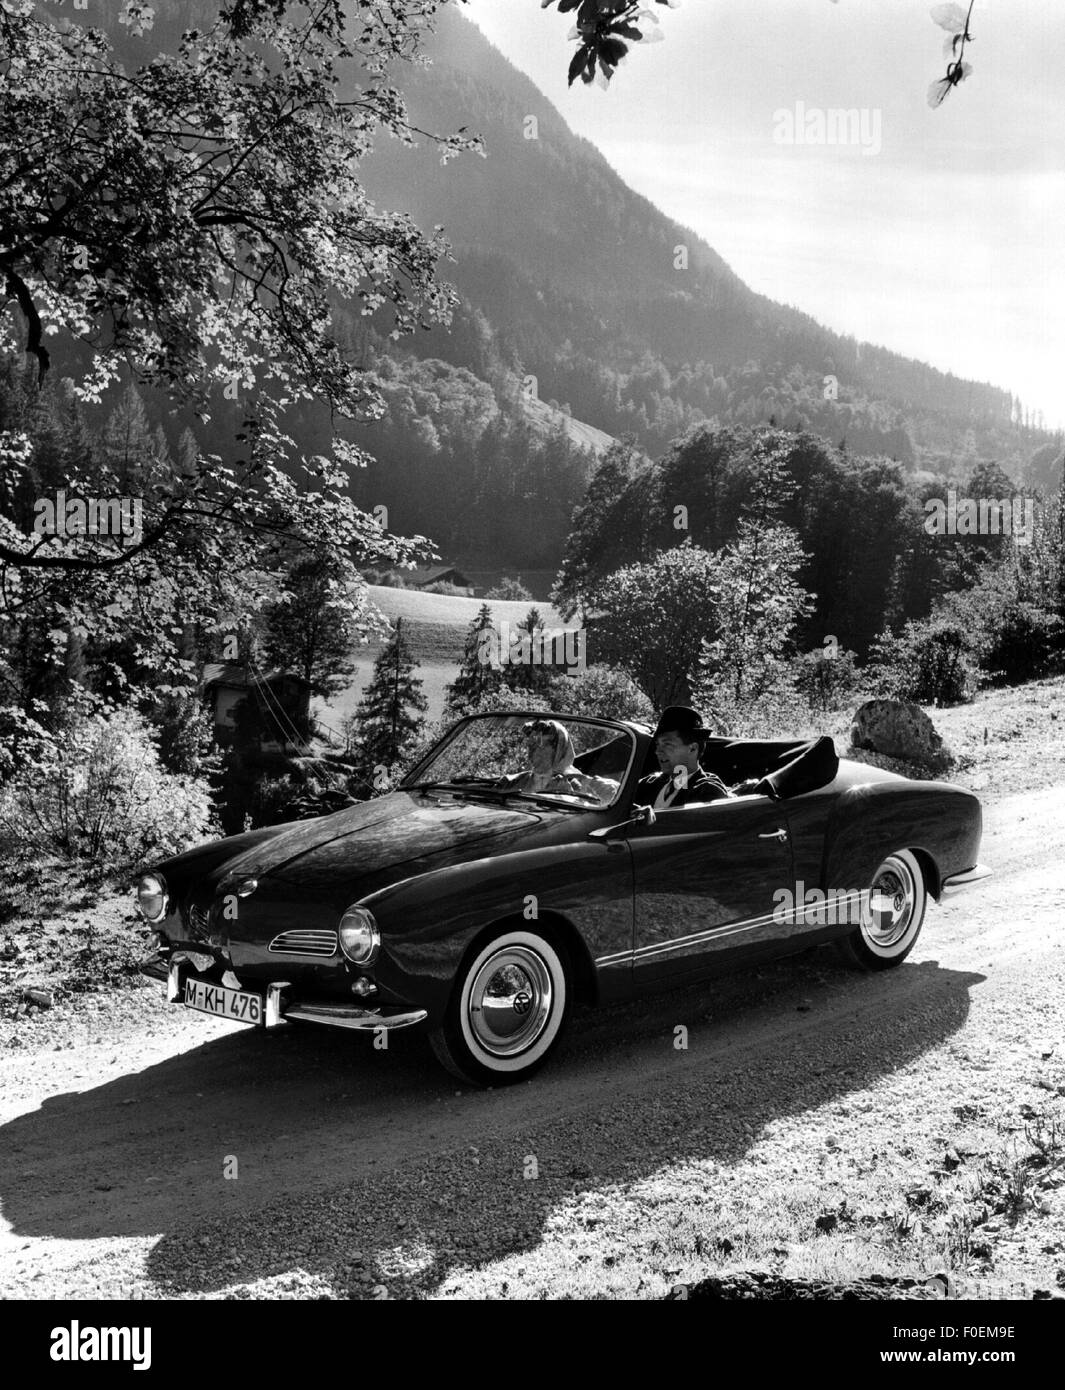 transport / transportation, cars, vehicle variants, Volkswagen, VW Karmann Ghia Typ 14 Cabriolet, 1960s, Additional-Rights-Clearences-Not Available Stock Photo